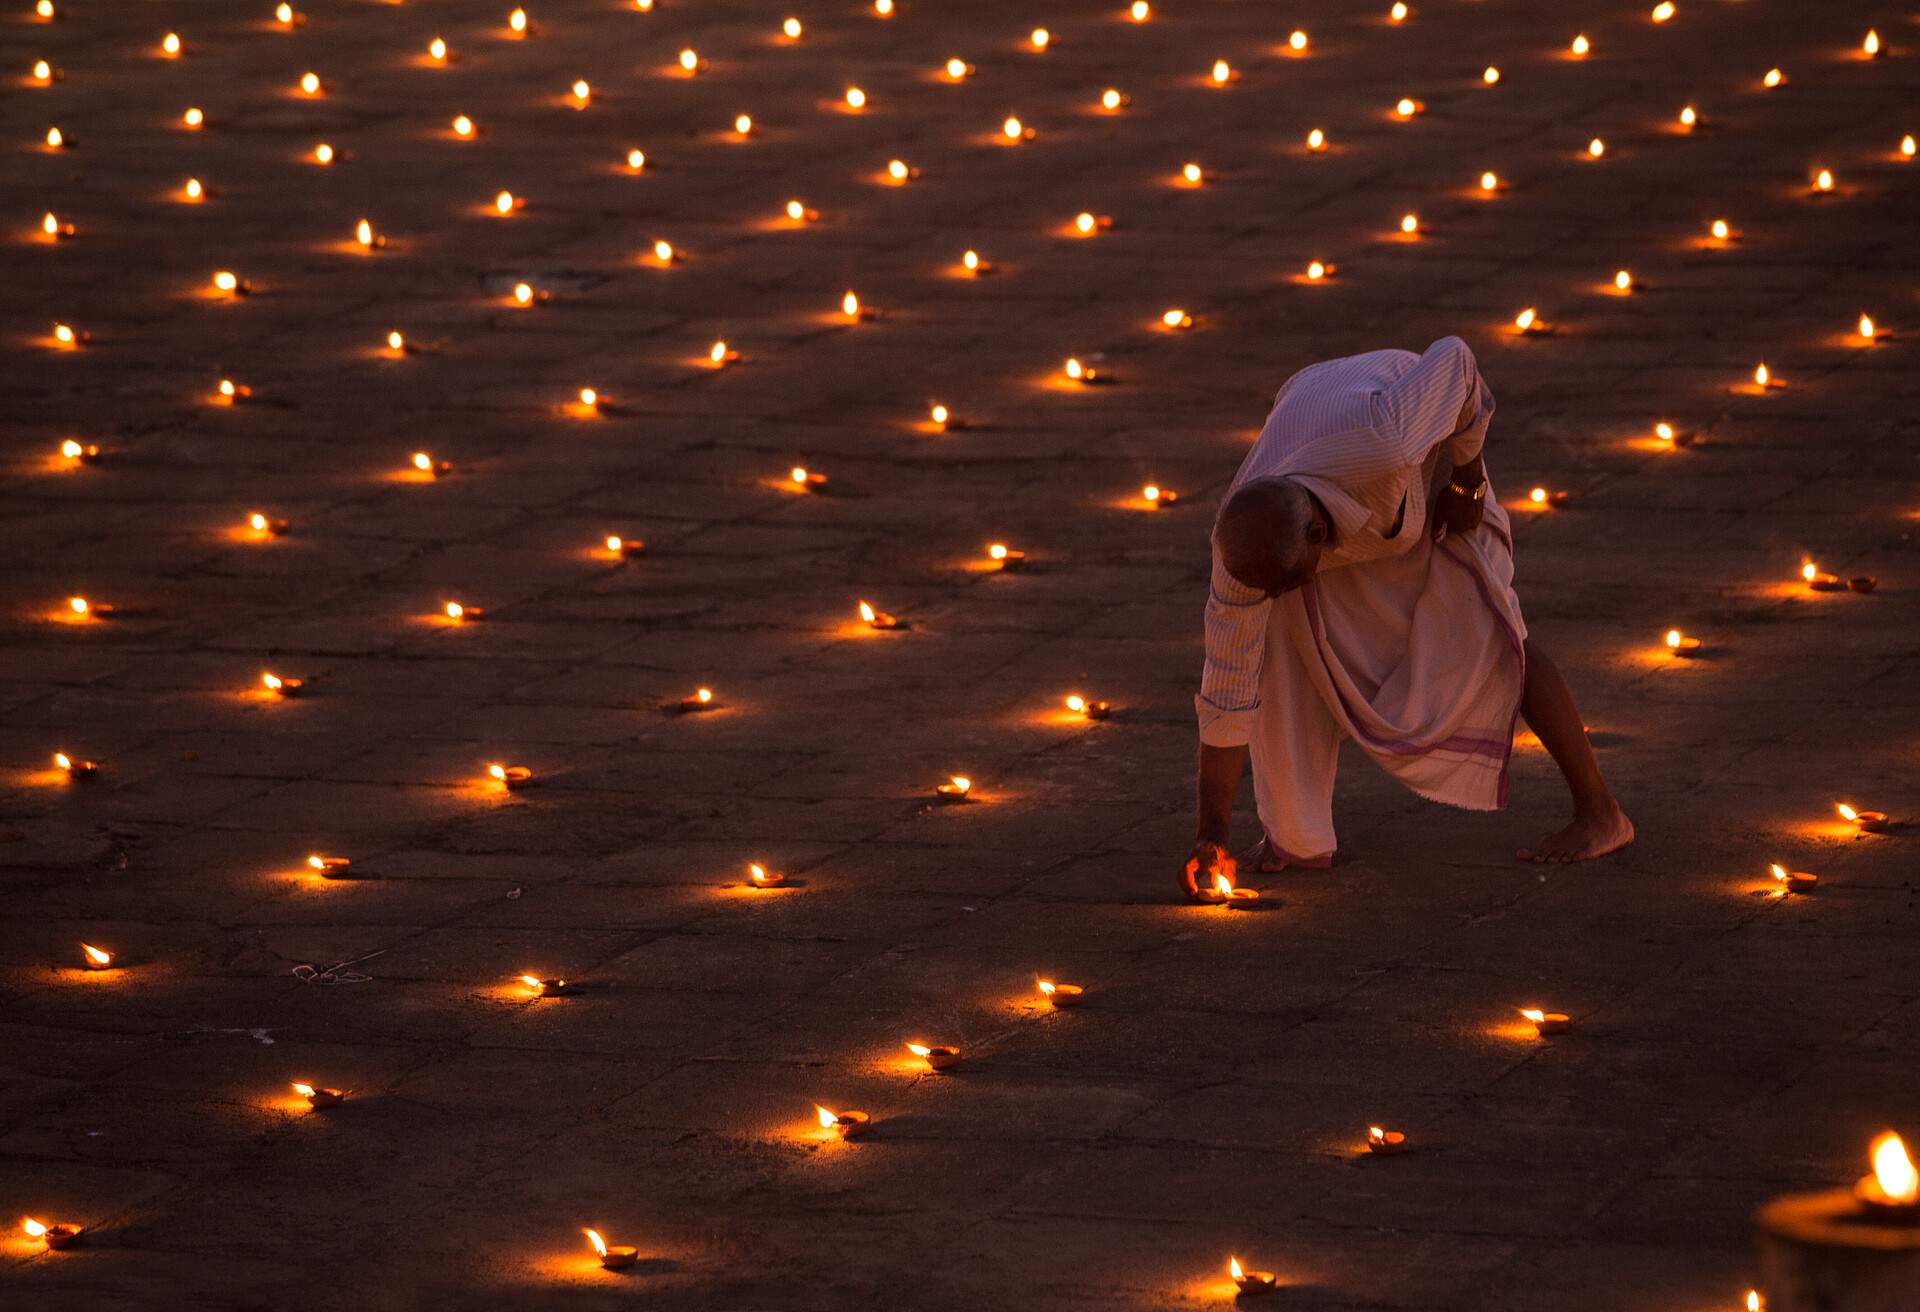 A man lits numerous candles lined in rows on the ground.